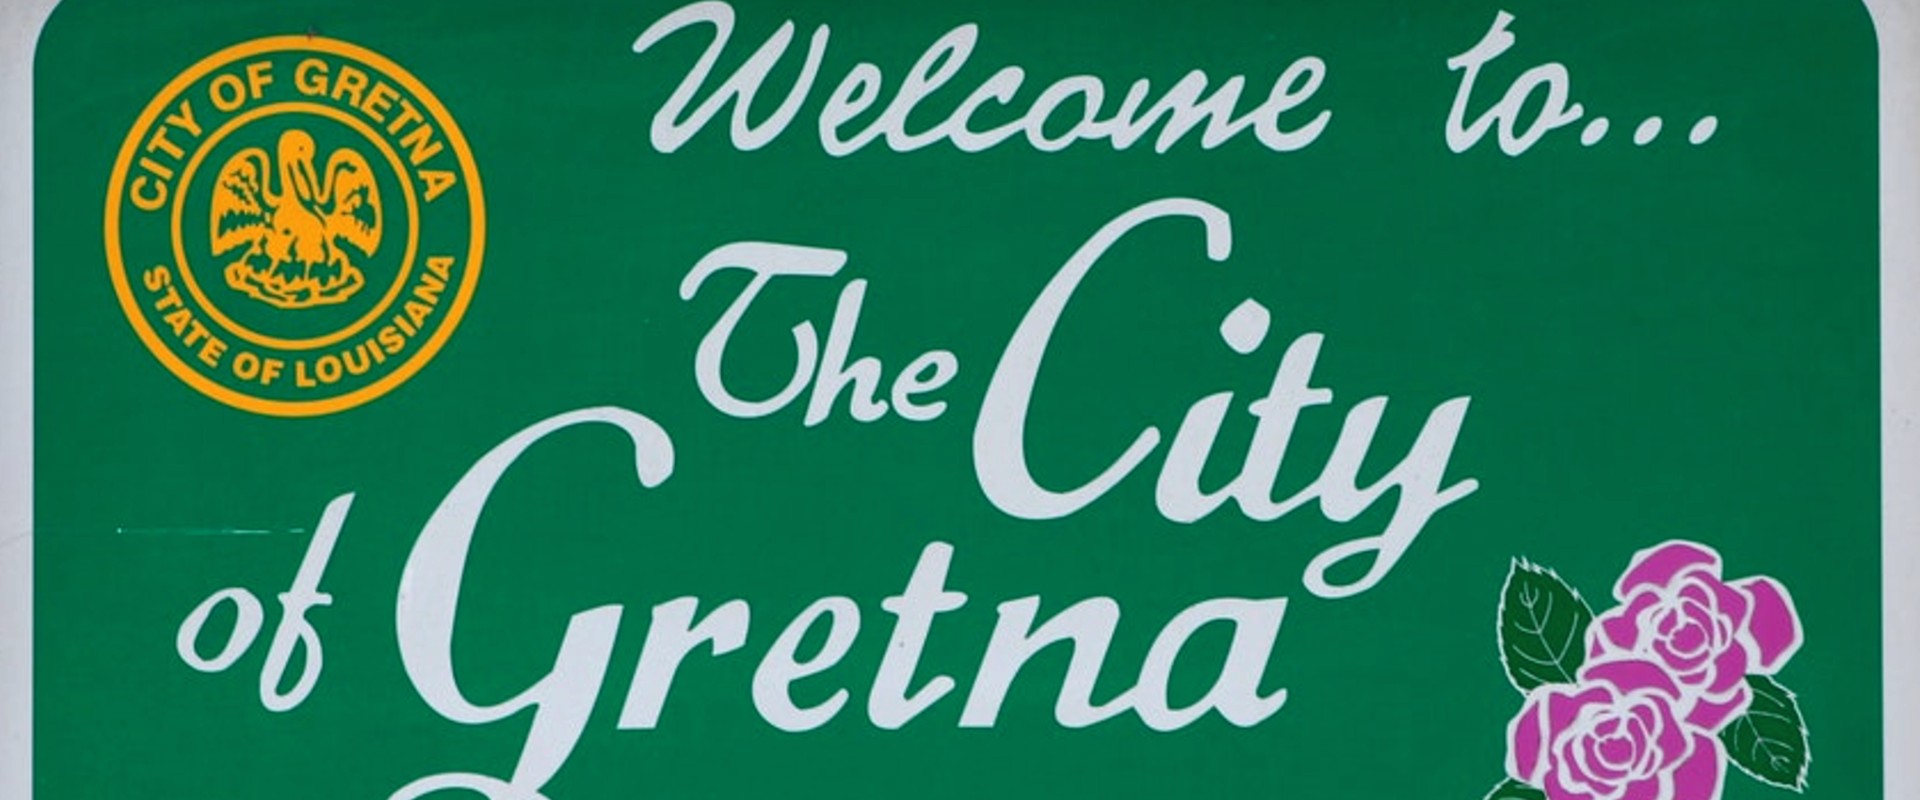 Sell my house fast Gretna - City of Gretna Welcome Sign